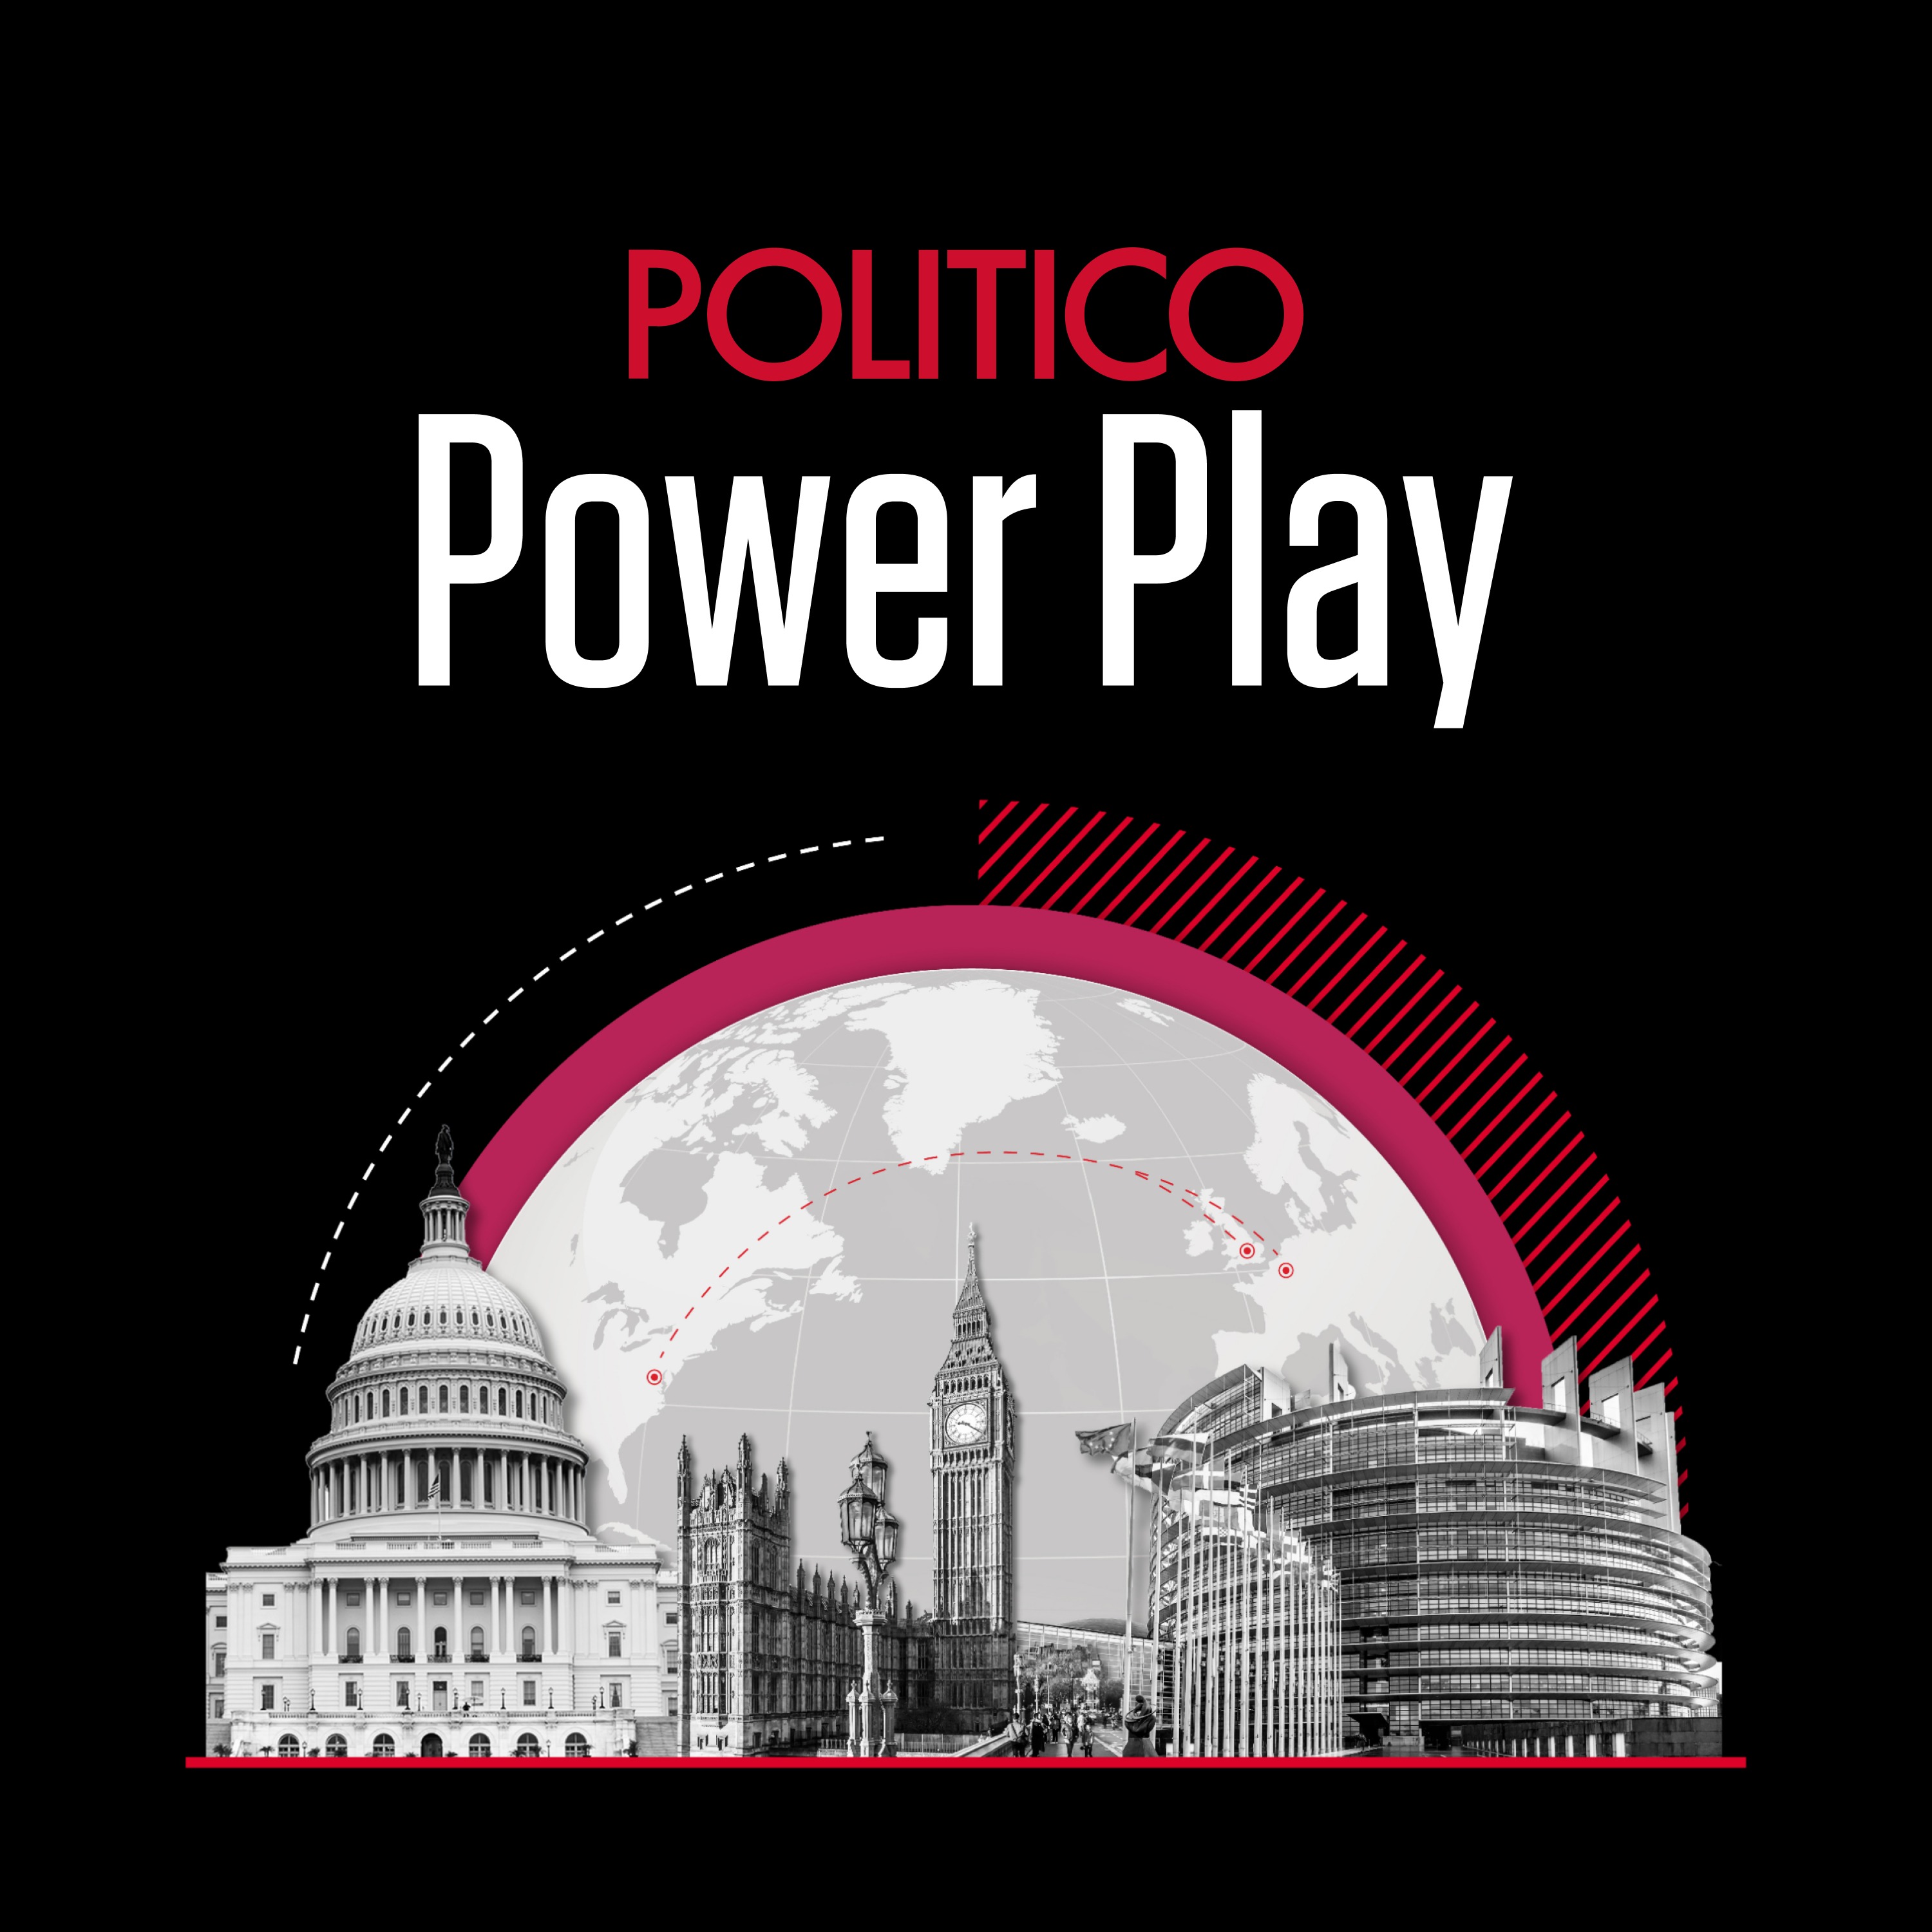 Biden’s State of the Union and Trump rematch | Interview with POLITICO’s global editor-in-chief